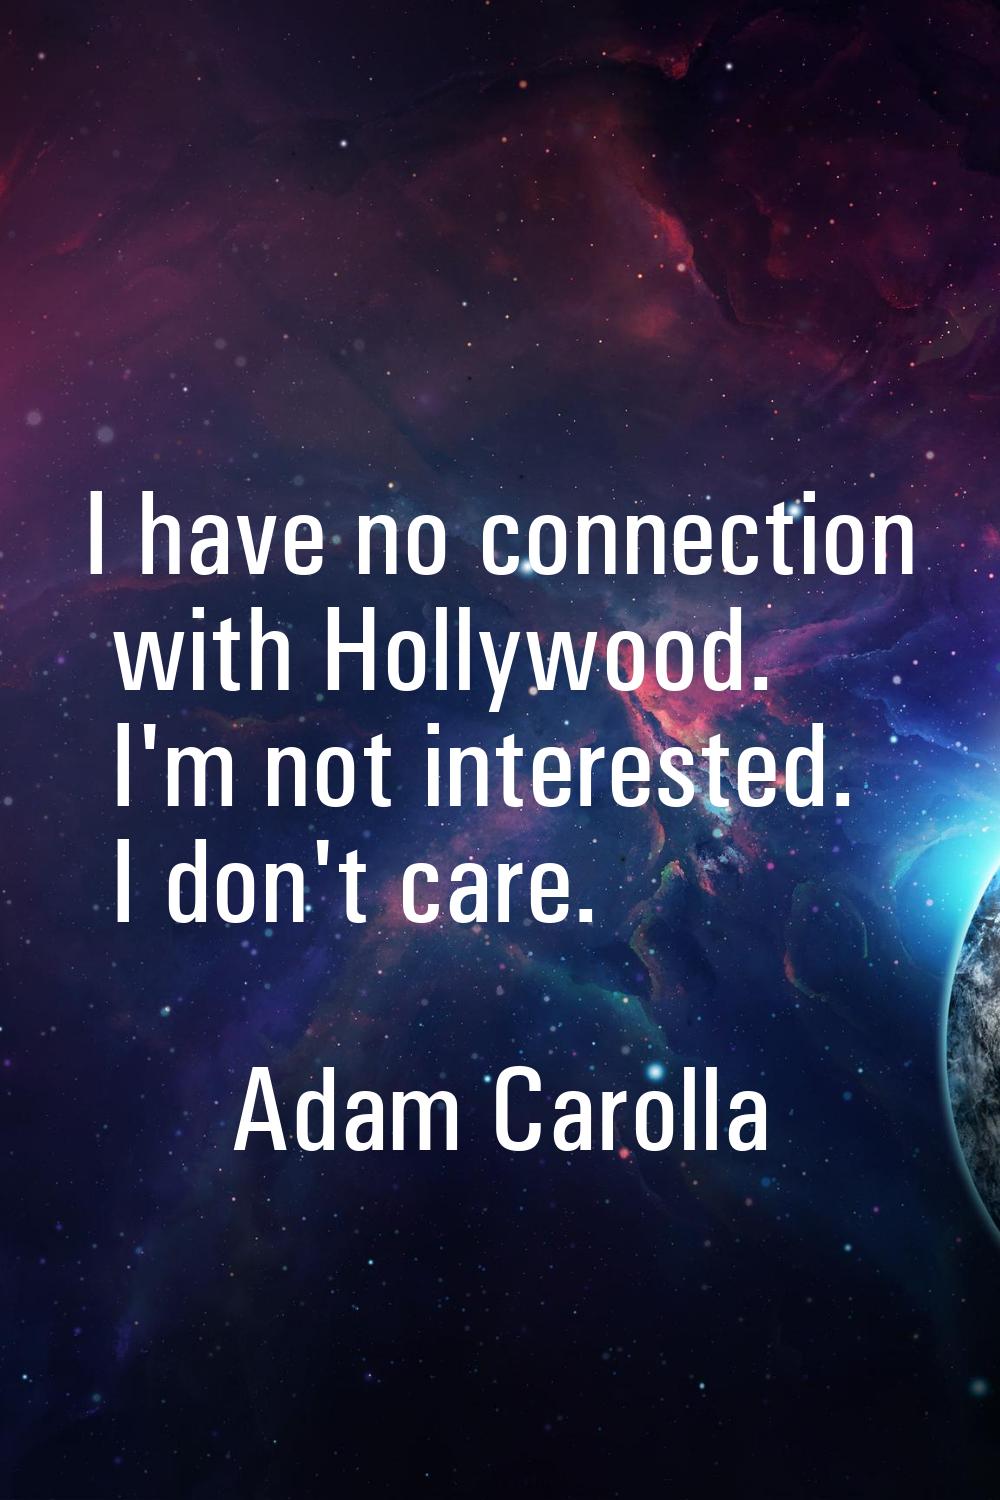 I have no connection with Hollywood. I'm not interested. I don't care.